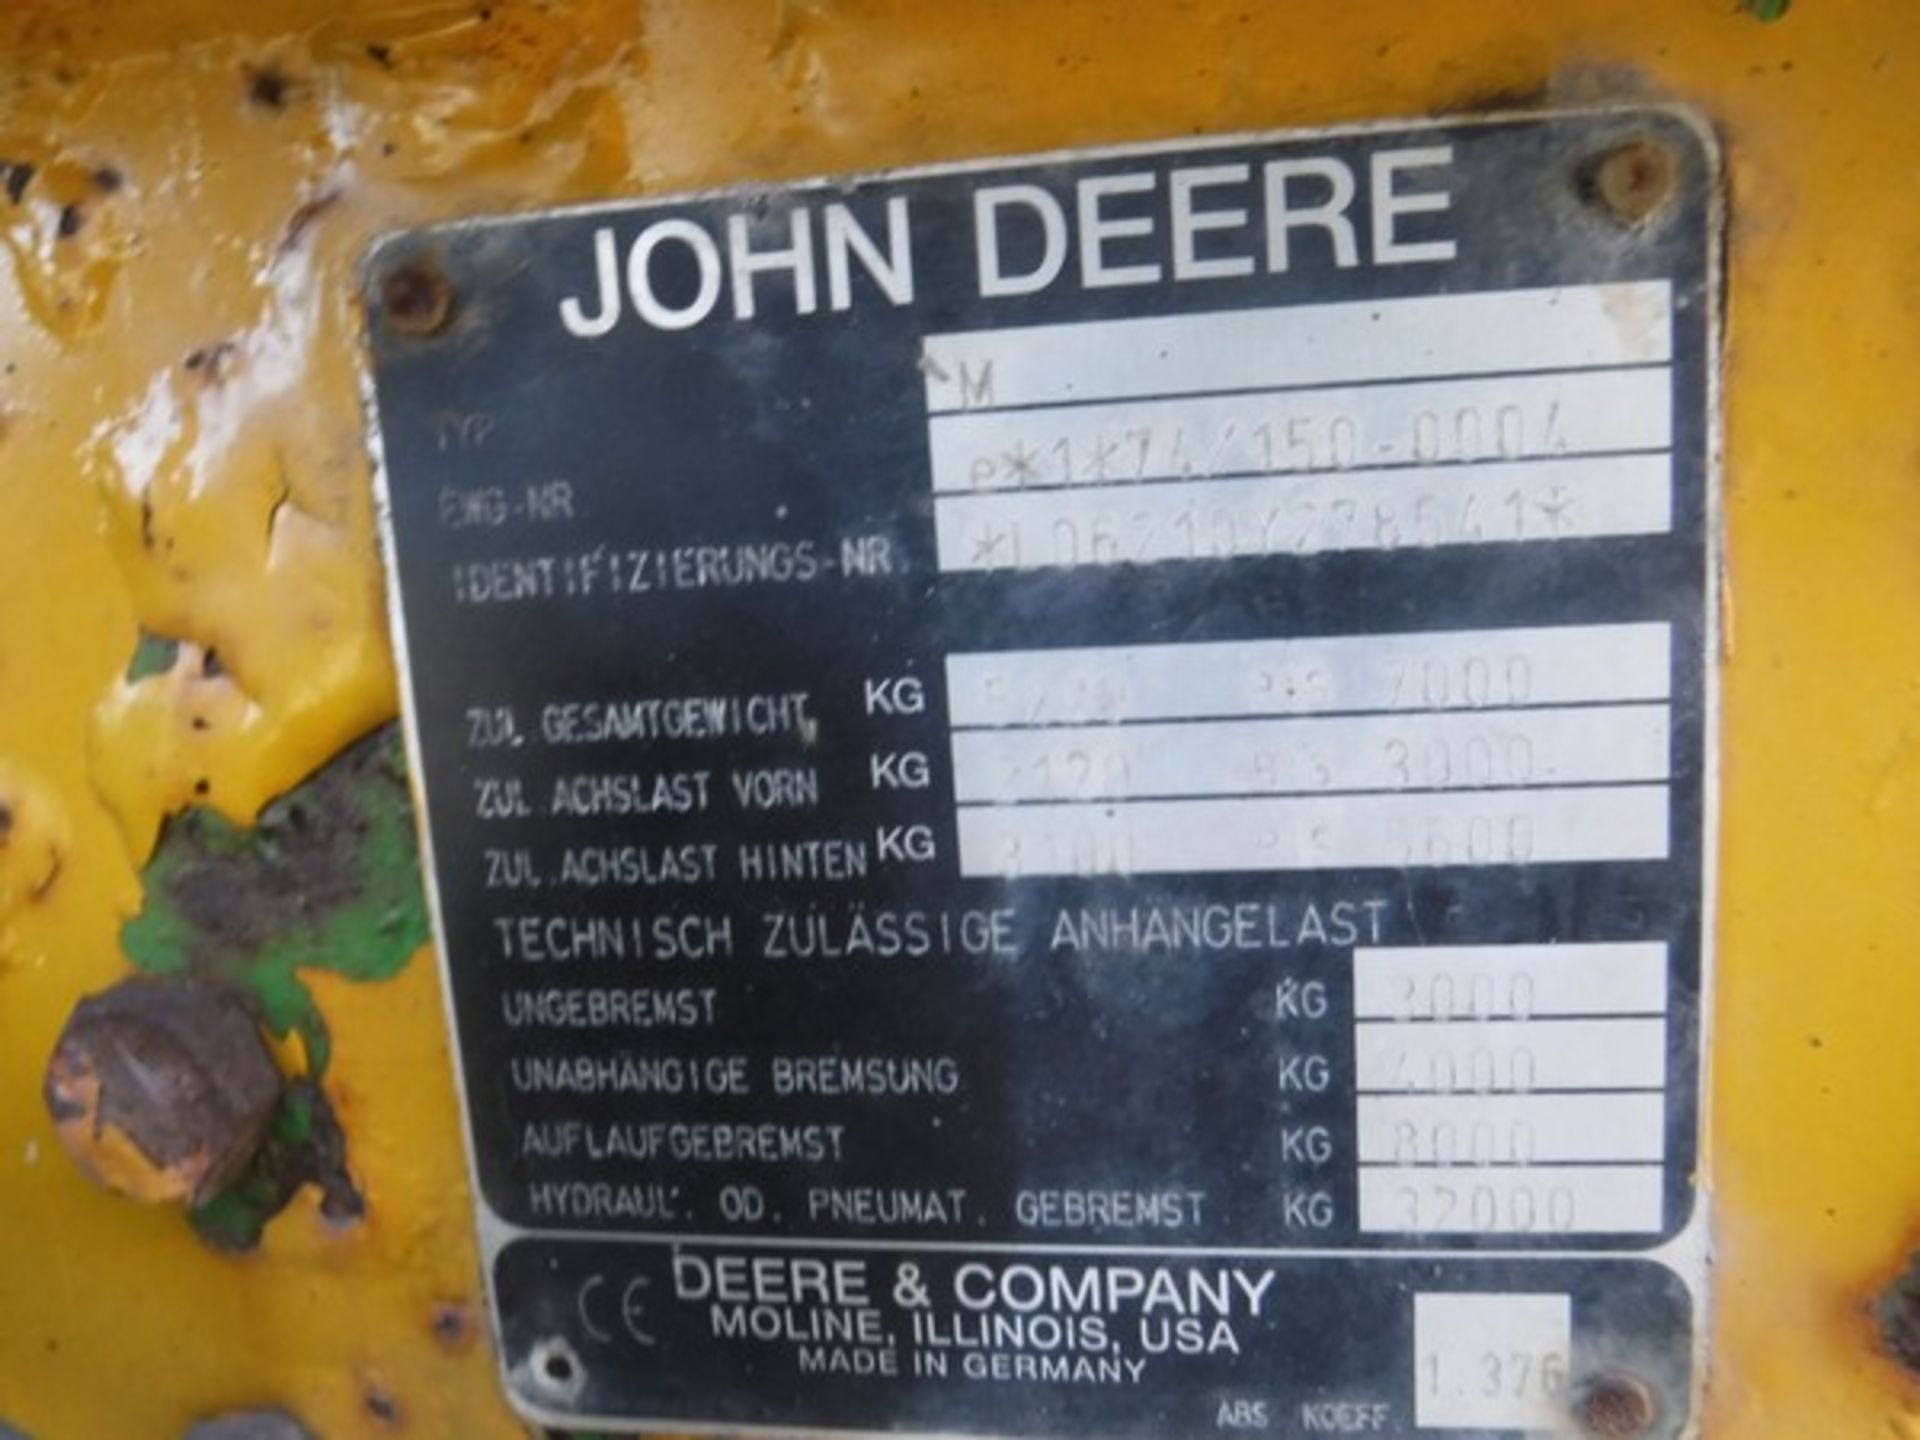 2000 JOHN DEERE 6210 tractor. Reg No W64 RKS s/n 106210Y278541. Hrs not known. Engine starting issu - Image 17 of 35